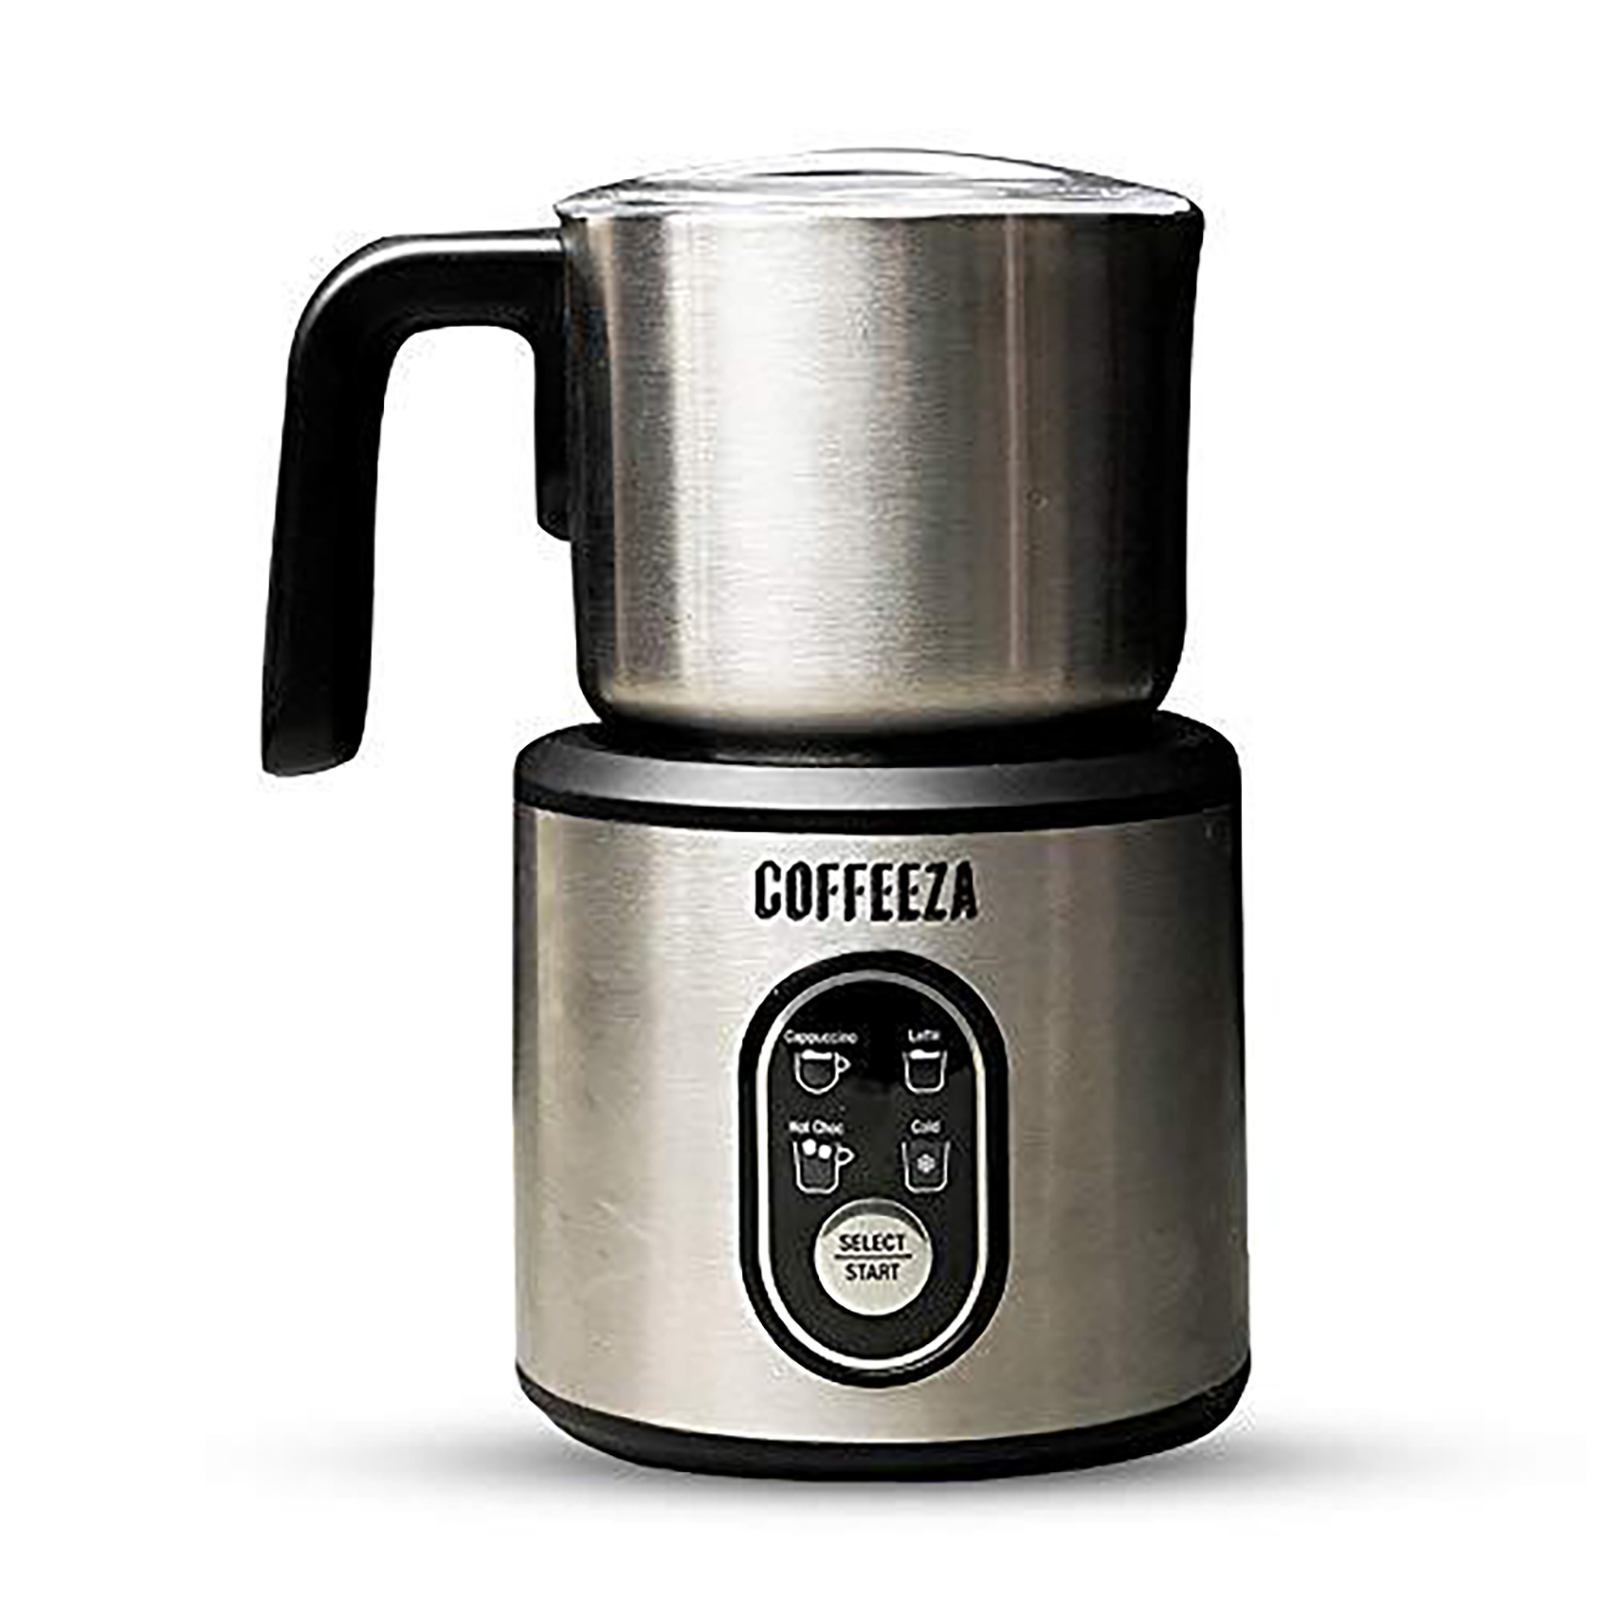 Coffeeza Frothimo Automatic Milk Frother & Heater (Makes Cappuccino, Latte & Milk Frothing, Auto-Off Function, MF-FRO1, Silver)